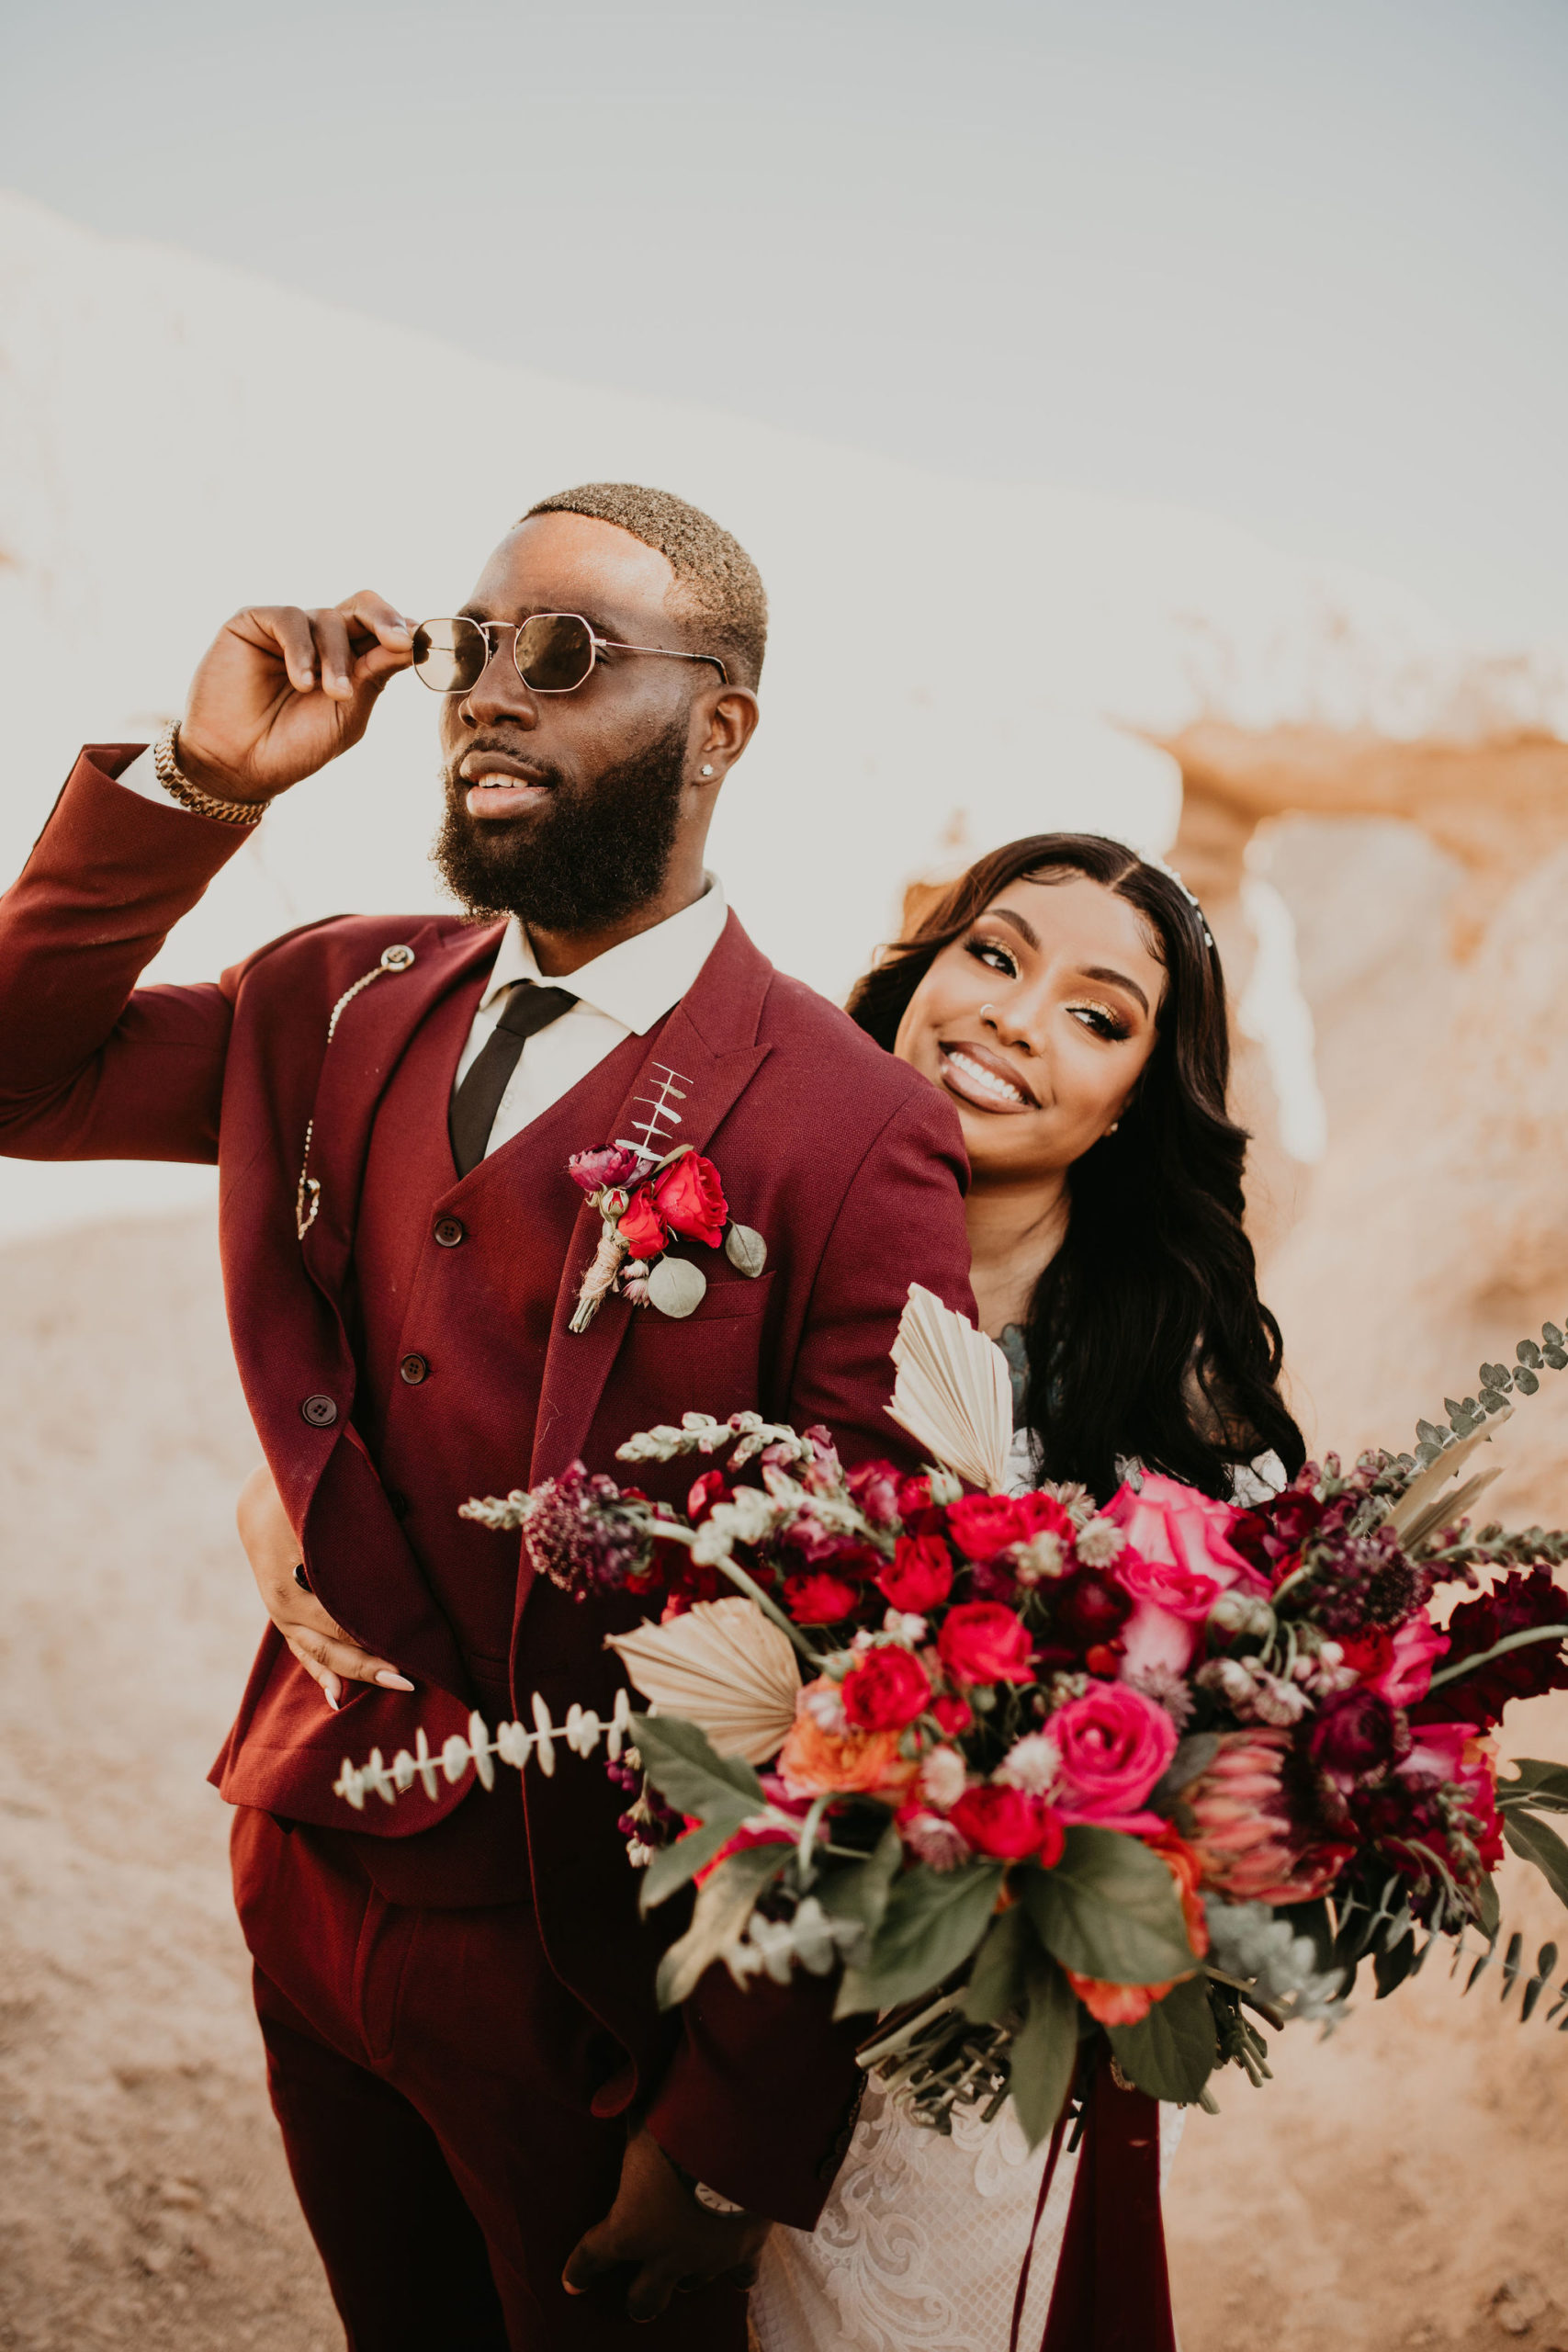 Groom with Burgundy Suit and Sunglasses & Boutonnière with Bride in Glam Make-up and Bouquet 